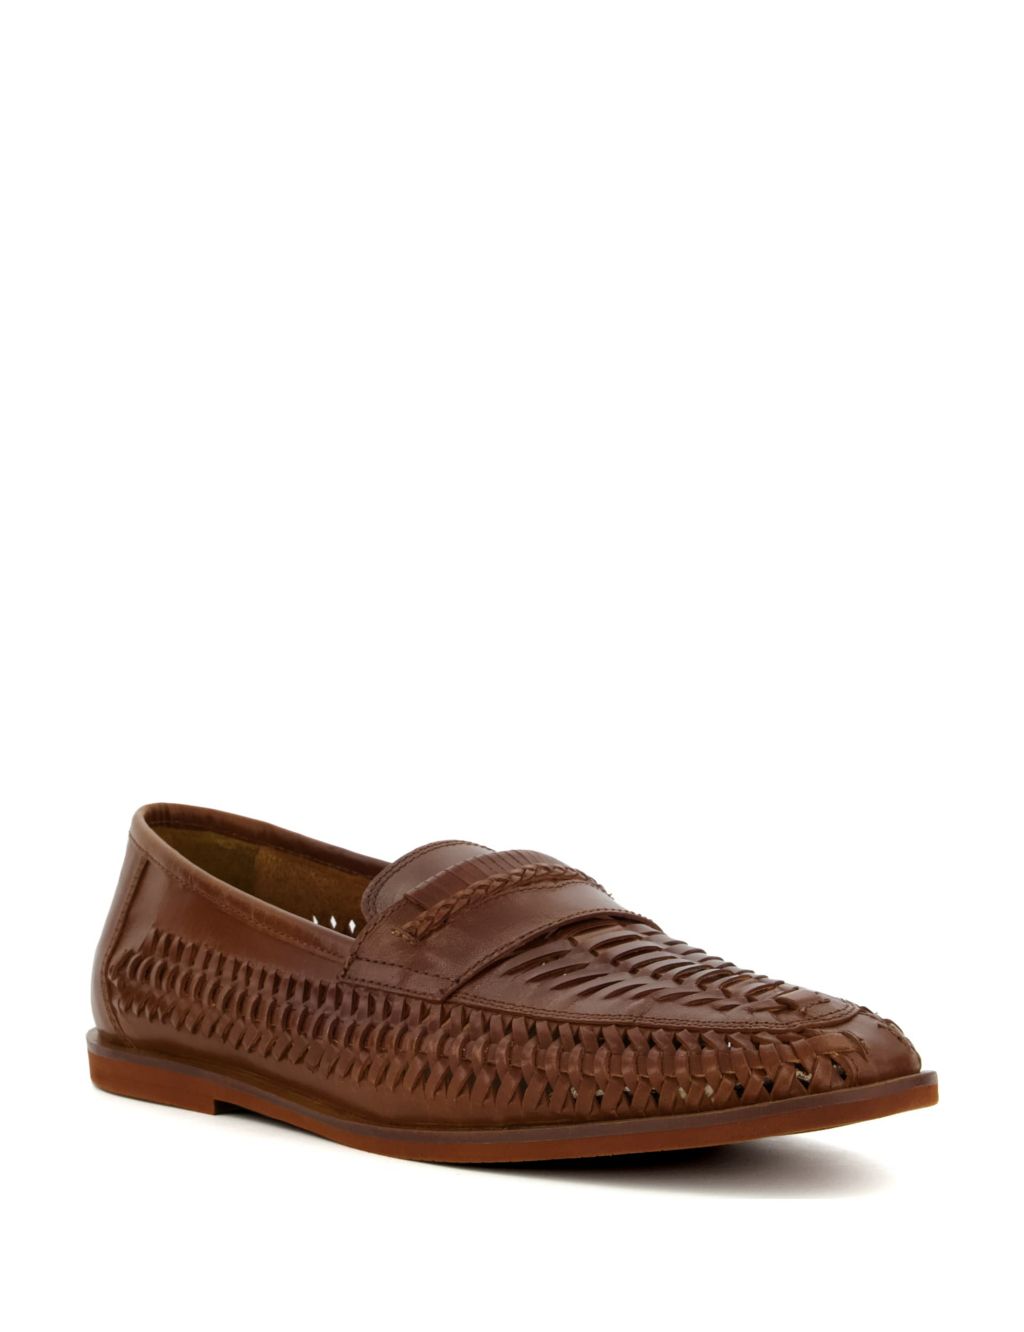 Leather Woven Flat Loafers | Dune London | M&S